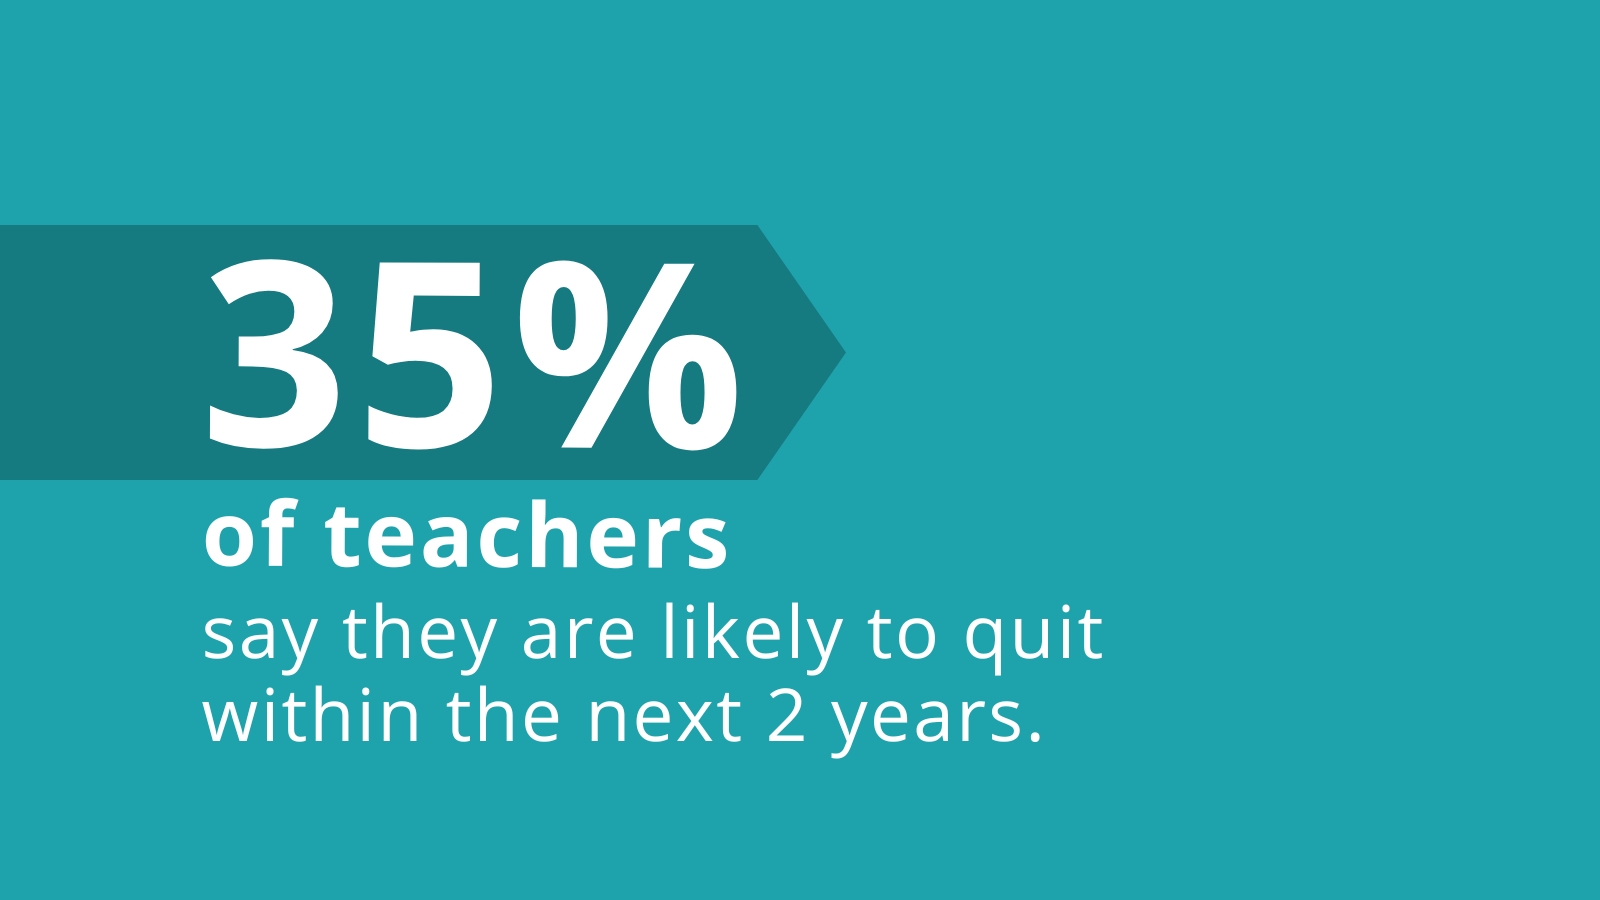 35% of teachers say they are likely to quit within the next 2 years.